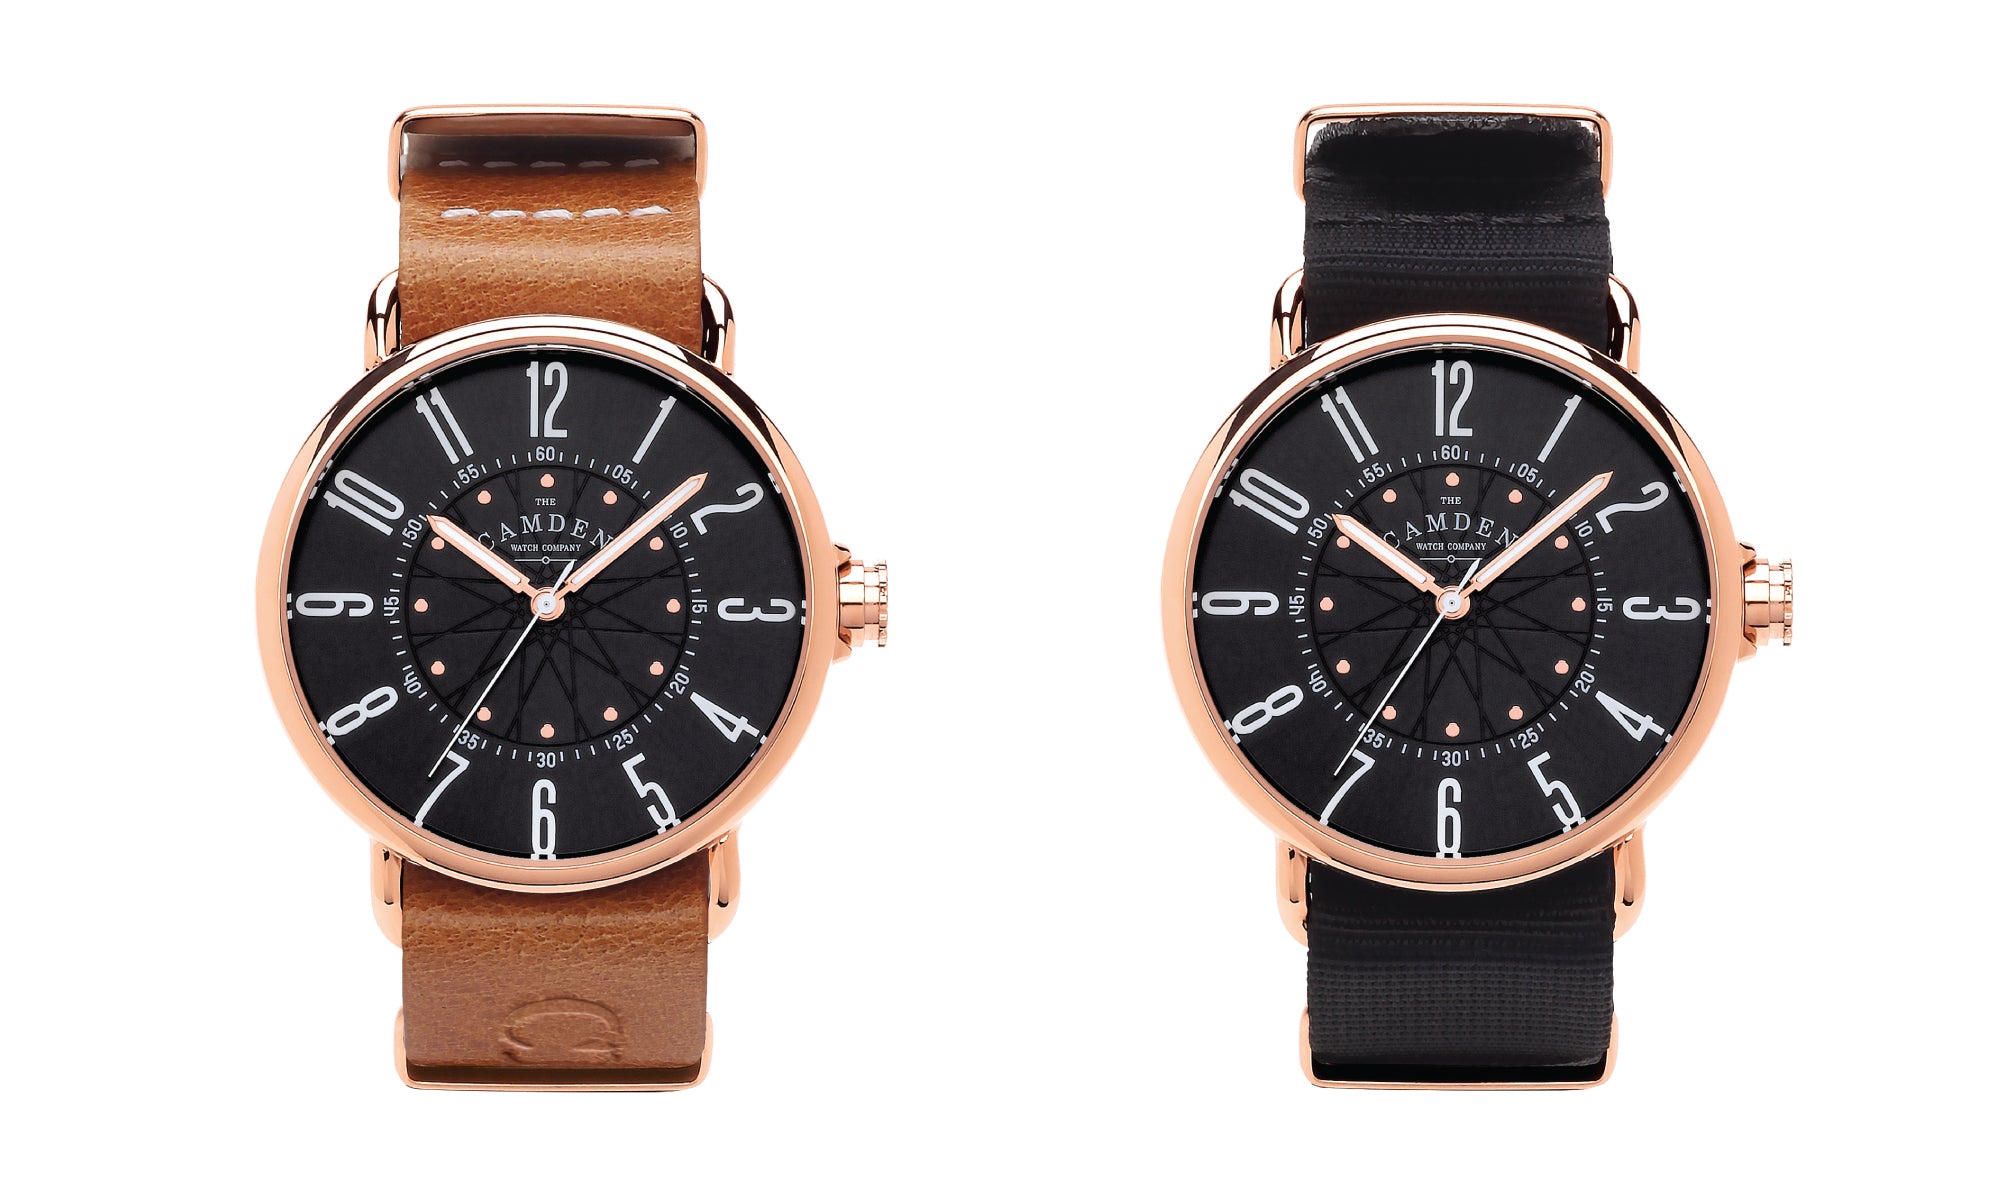 The No.88 Camden Watch Company Men's watch with tan strap